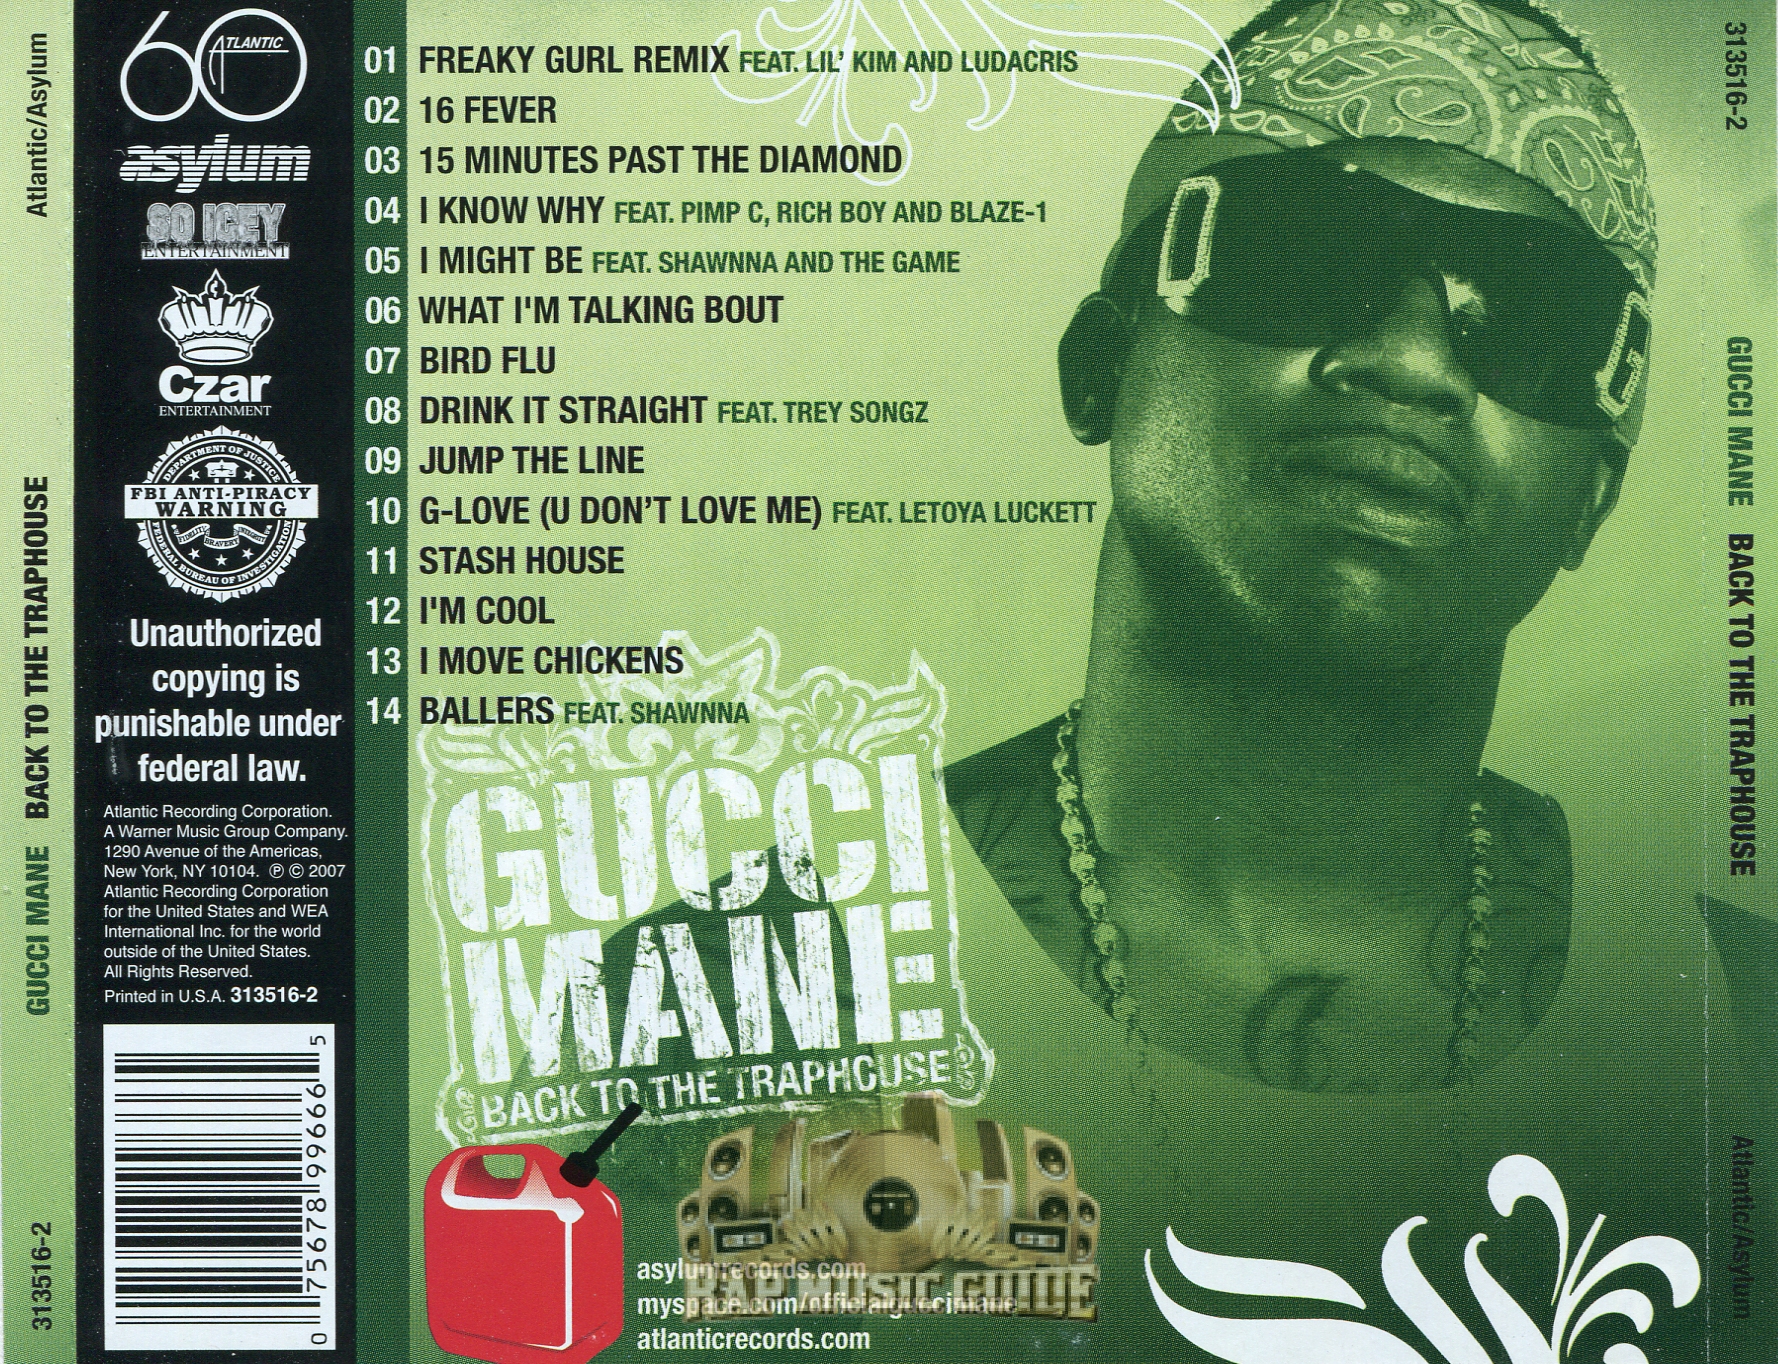 Back to the Traphouse by Gucci Mane (2007-05-03) by 